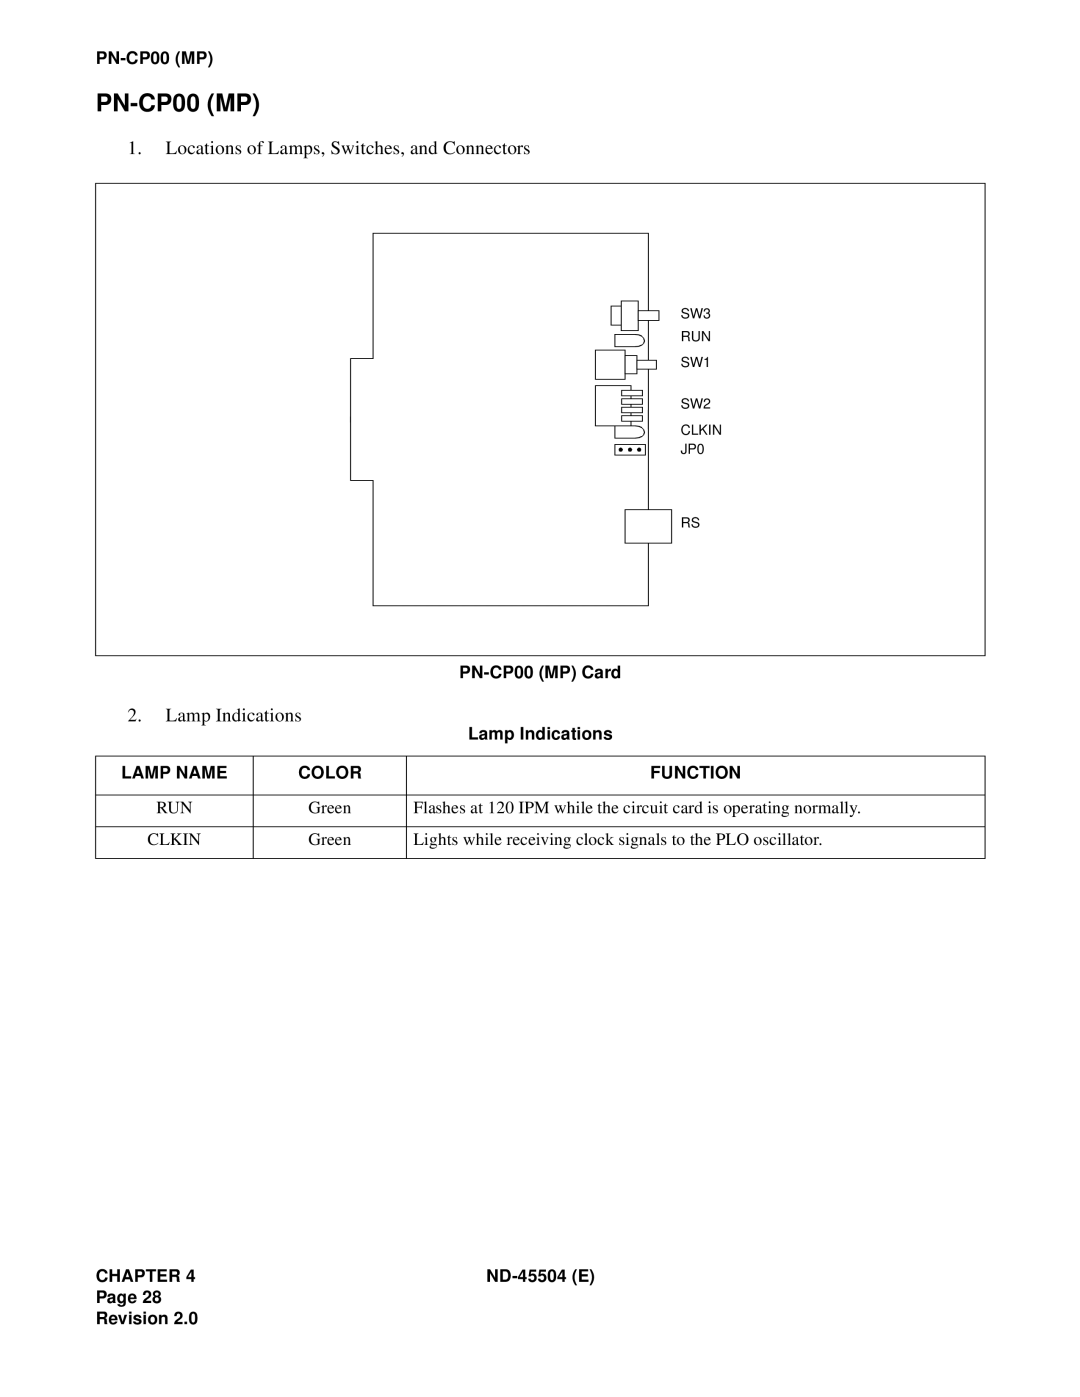 NEC 2000 IVS Locations of Lamps, Switches, and Connectors, Lamp Indications, PN-CP00MP Card, Lamp Name, Color, Chapter 